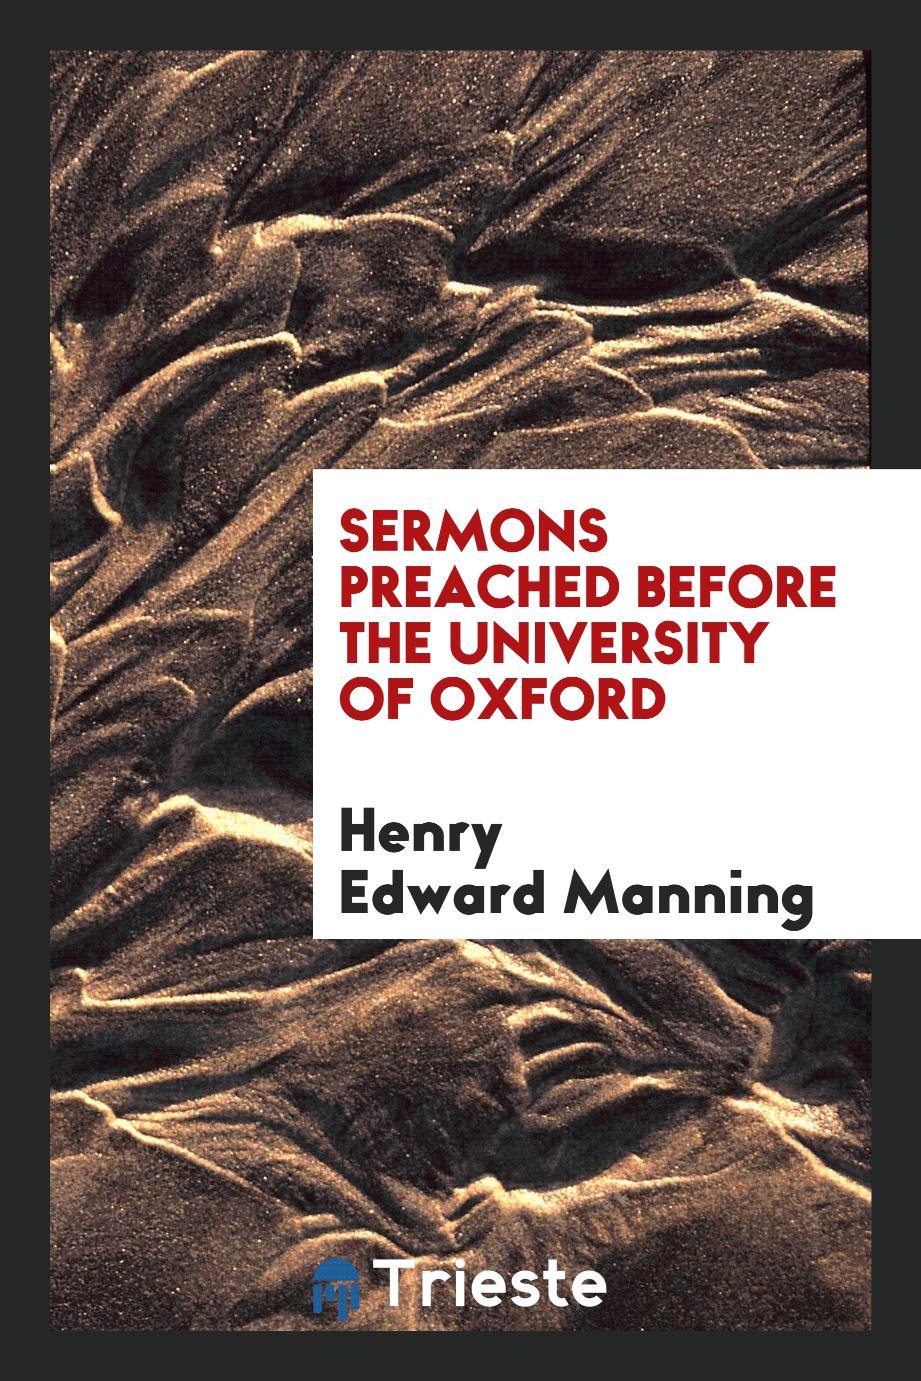 Sermons preached before the University of Oxford